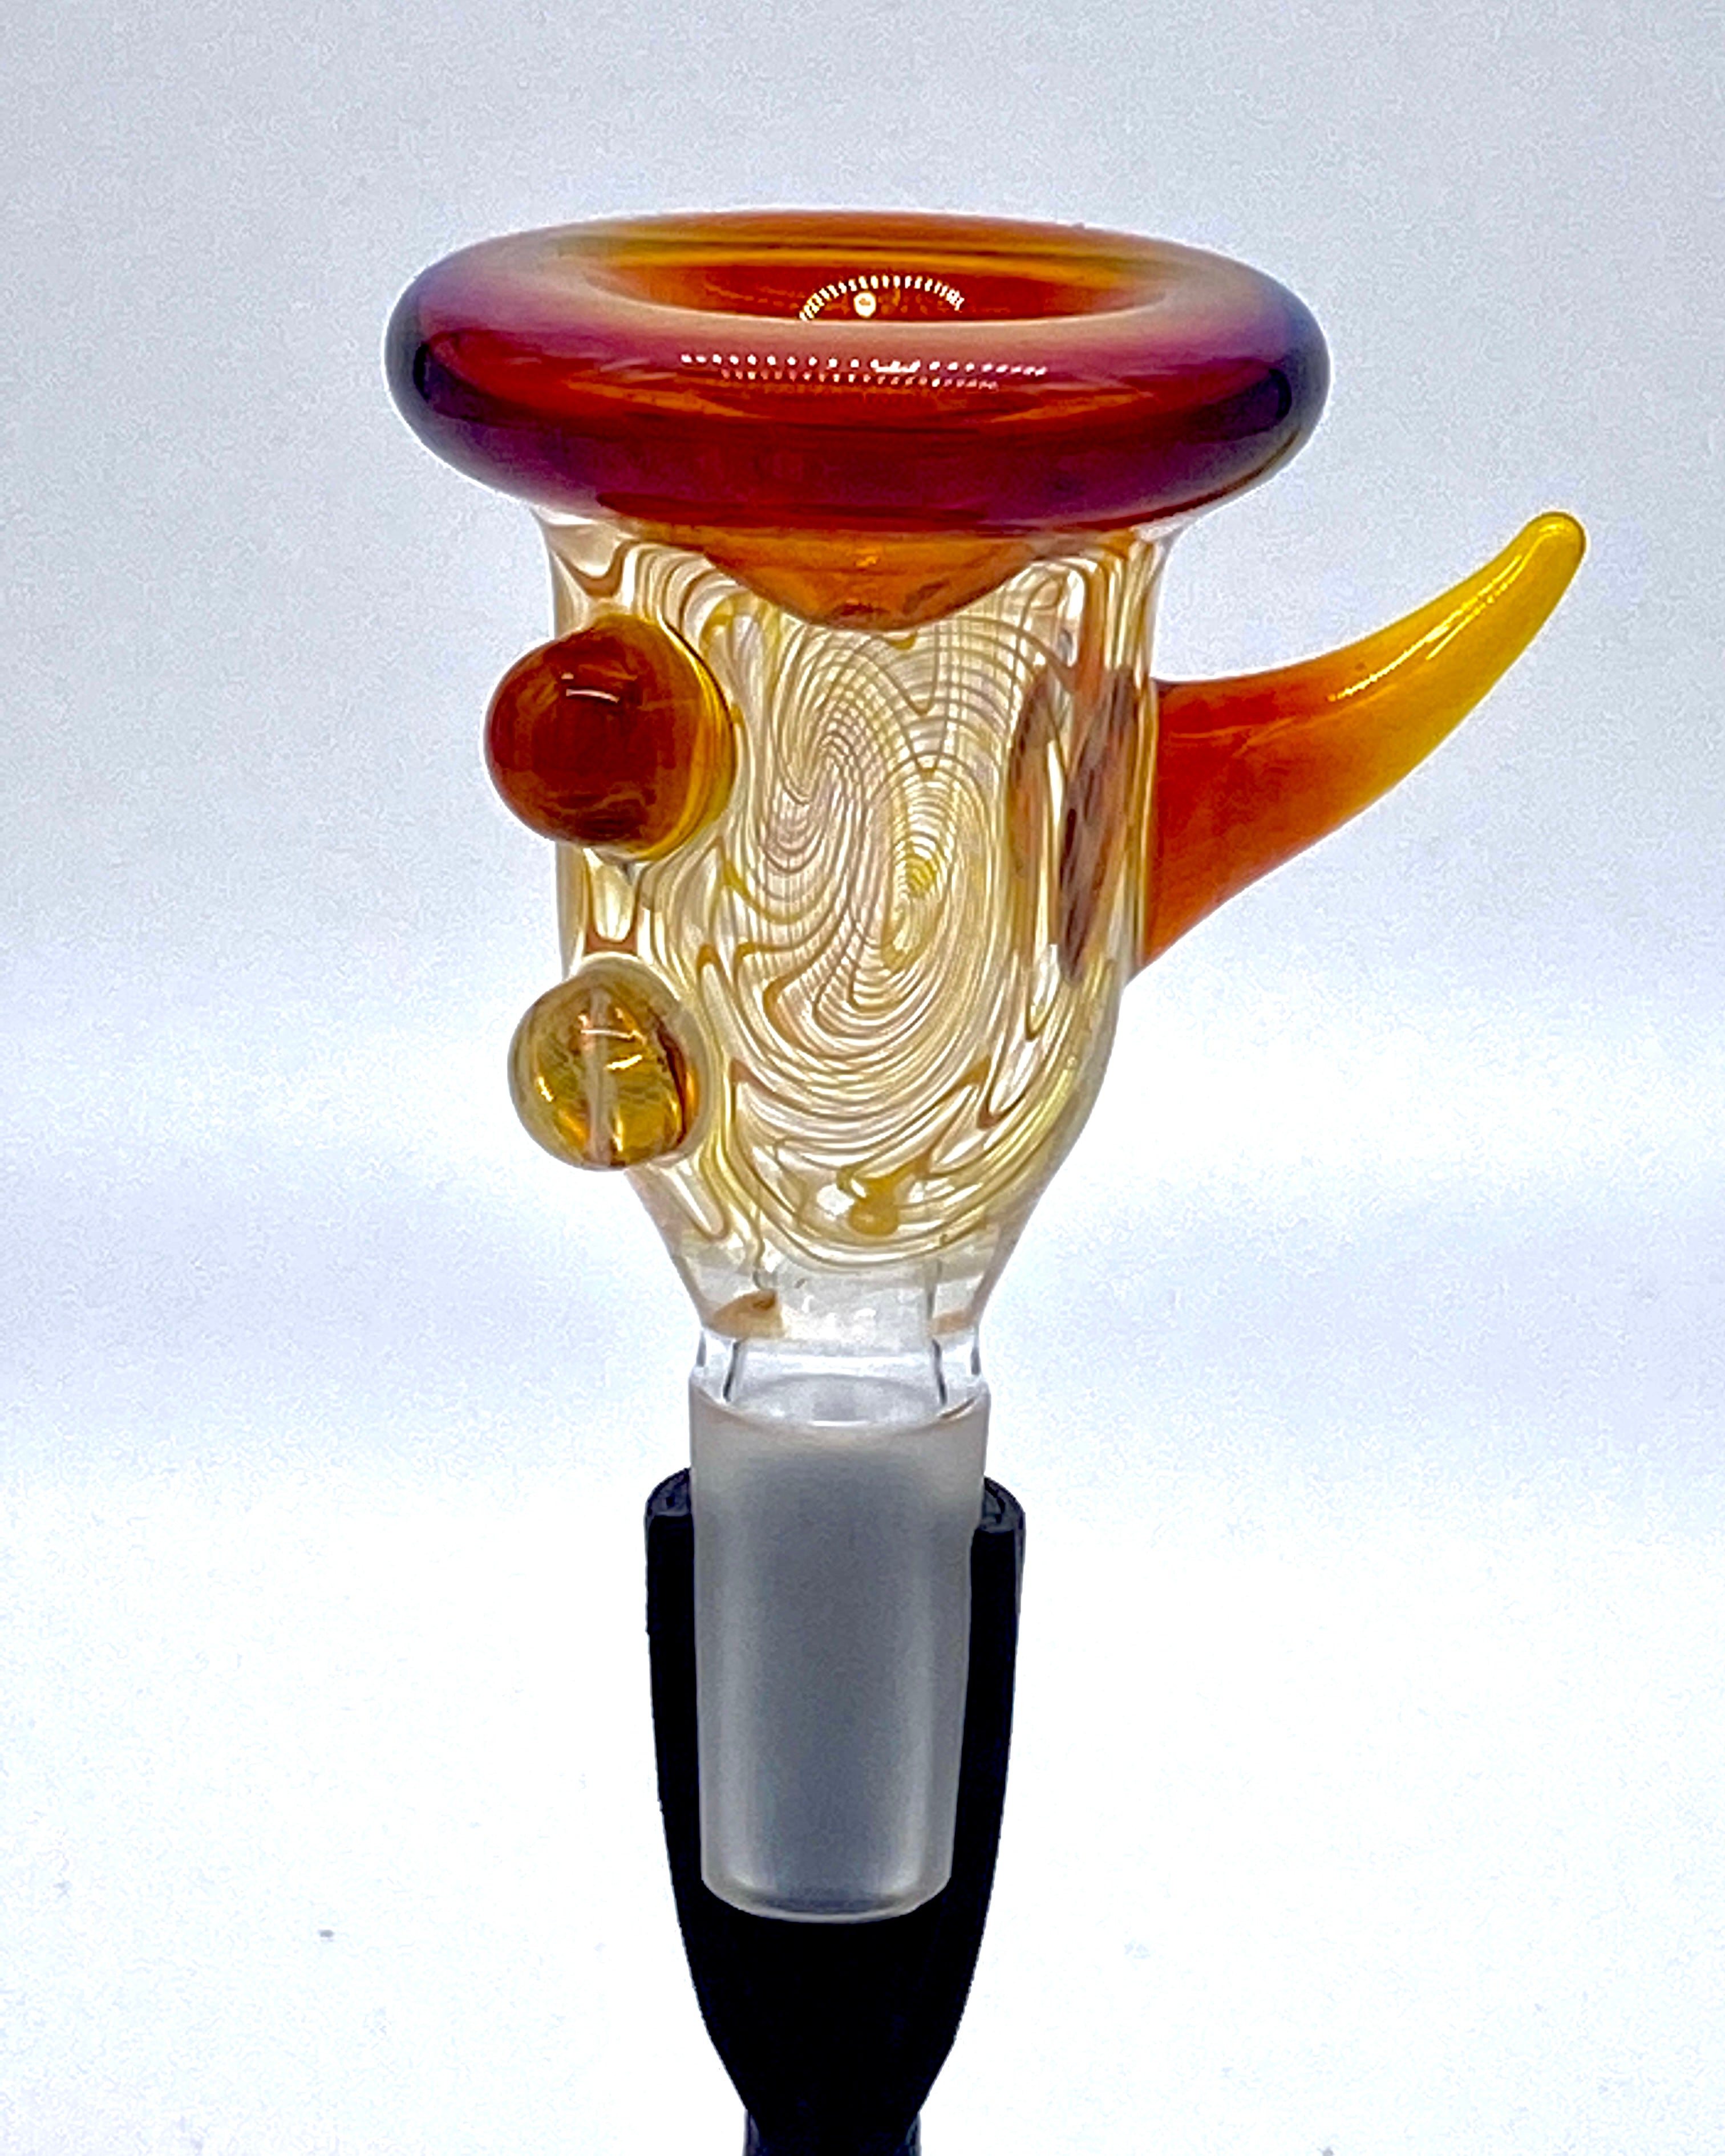 Gasp One Amber Purple & Fumed 14mm Single Hole Slide - TheSmokeyMcPotz Collection 